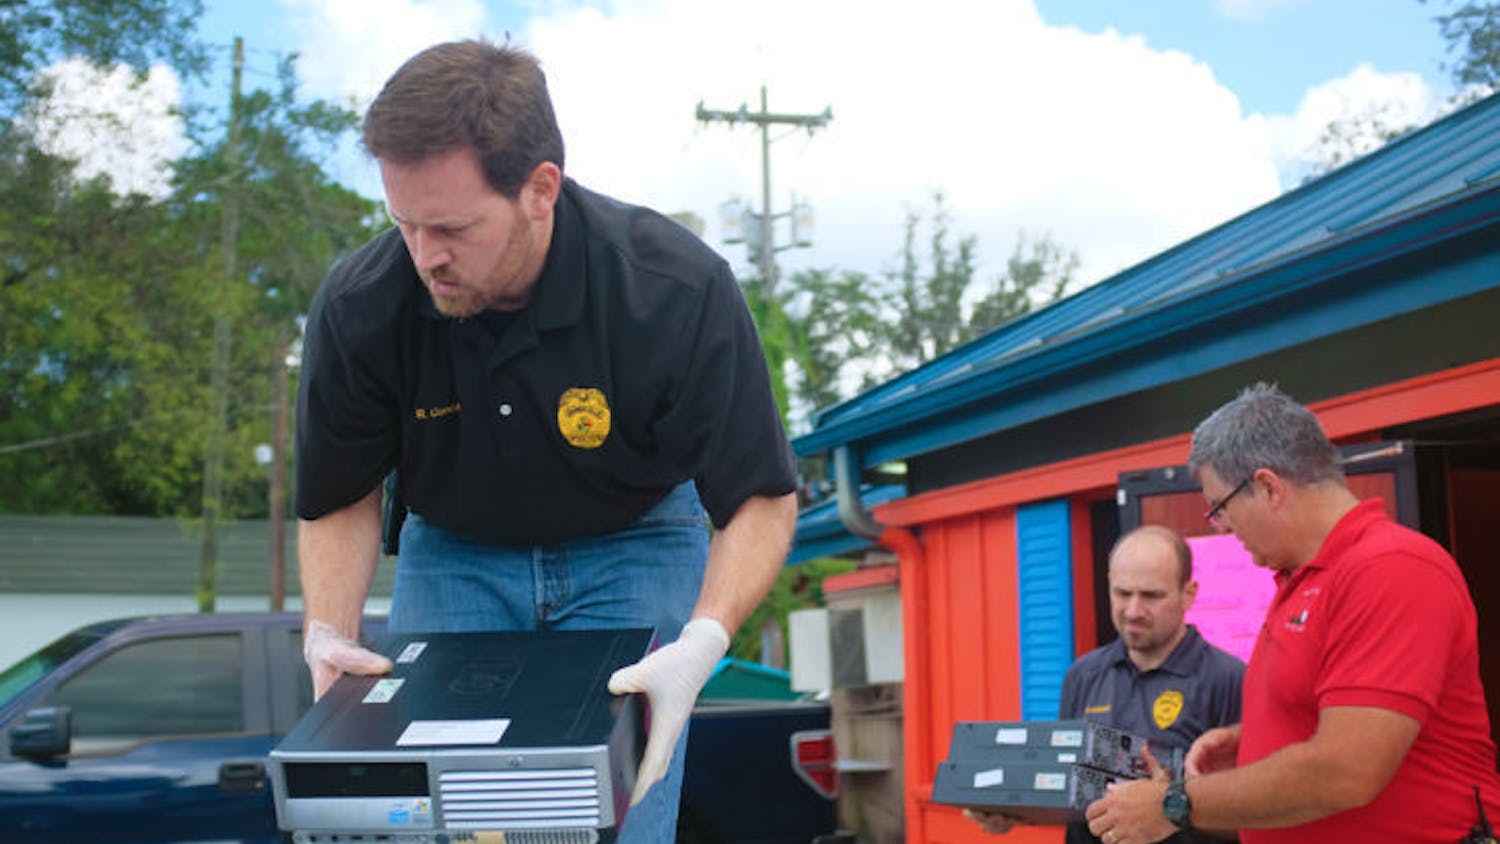 Detective Rob Concannon, Detective Matt Goeckel and Sgt. Greg Armagost load computers marked for evidence in a truck Tuesday. Gainesville Police raided Gators Hot Spot Sweepstakes, an Internet cafe, after a judge issued a search warrant.